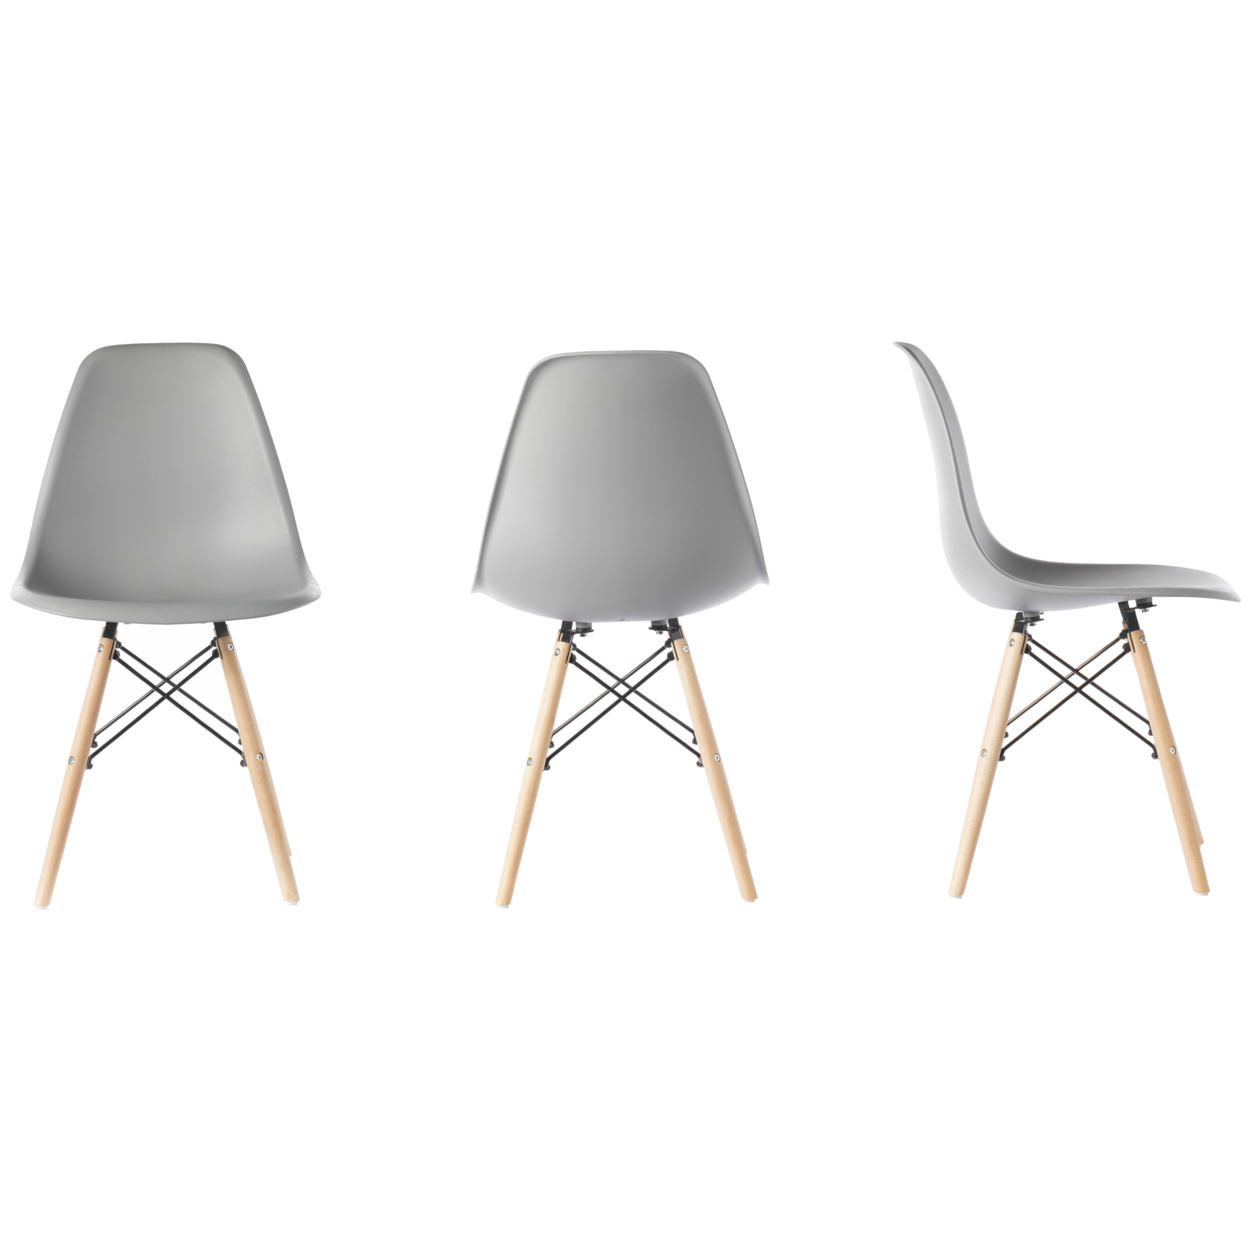 Mid-Century Modern Style Plastic DSW Shell Dining Chair With Solid Beech Wooden Dowel Eiffel Legs - Set Of 4 White